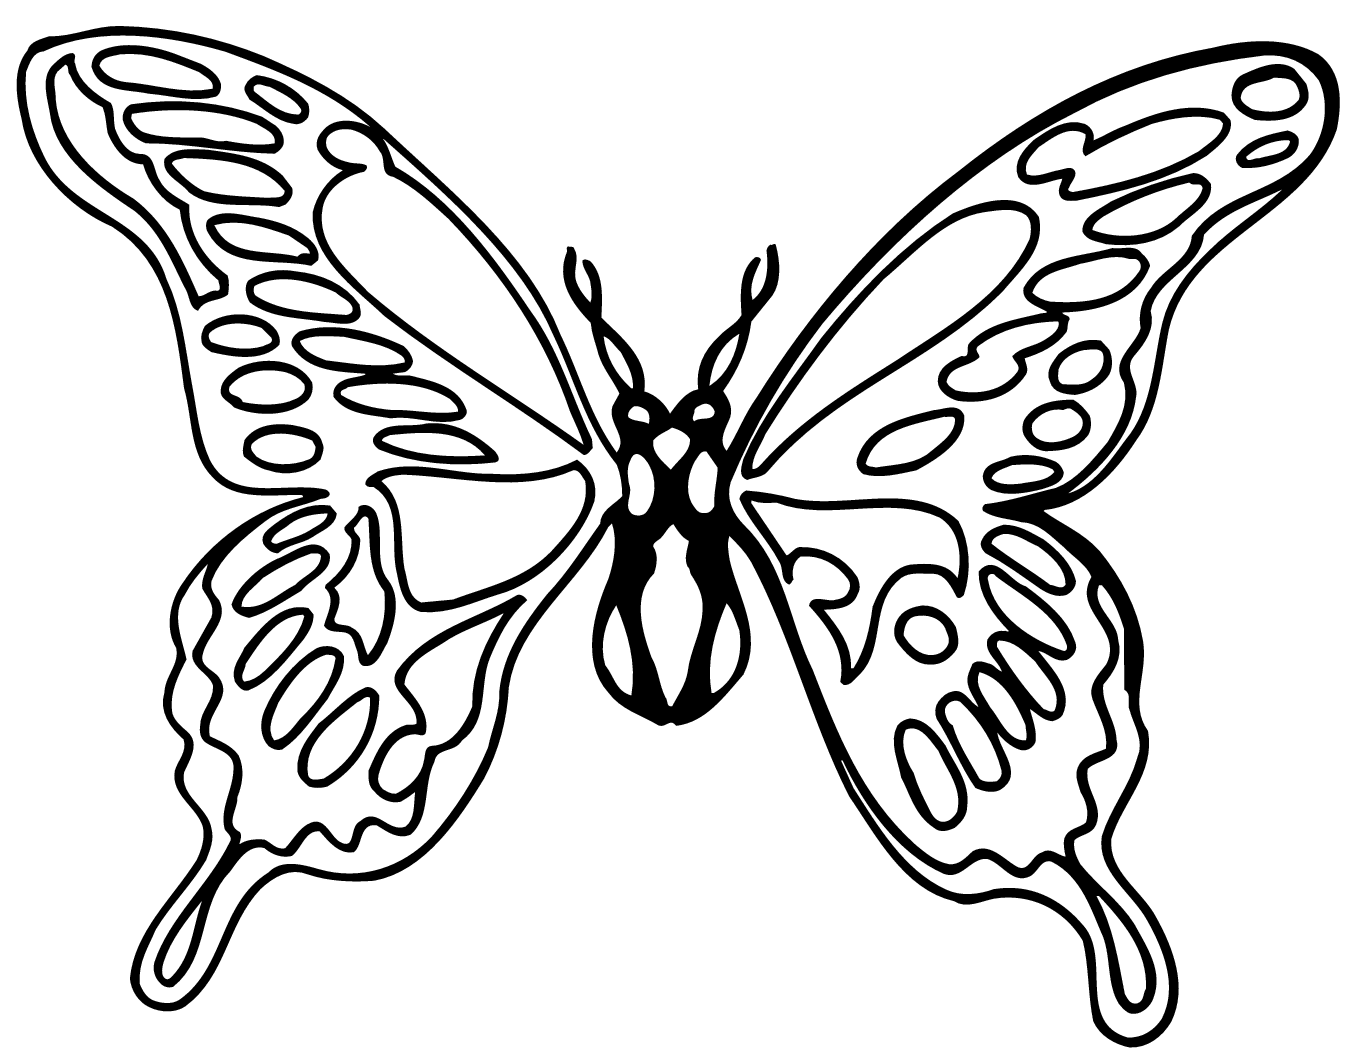 Monarch butterfly black and white clipart clipart 2